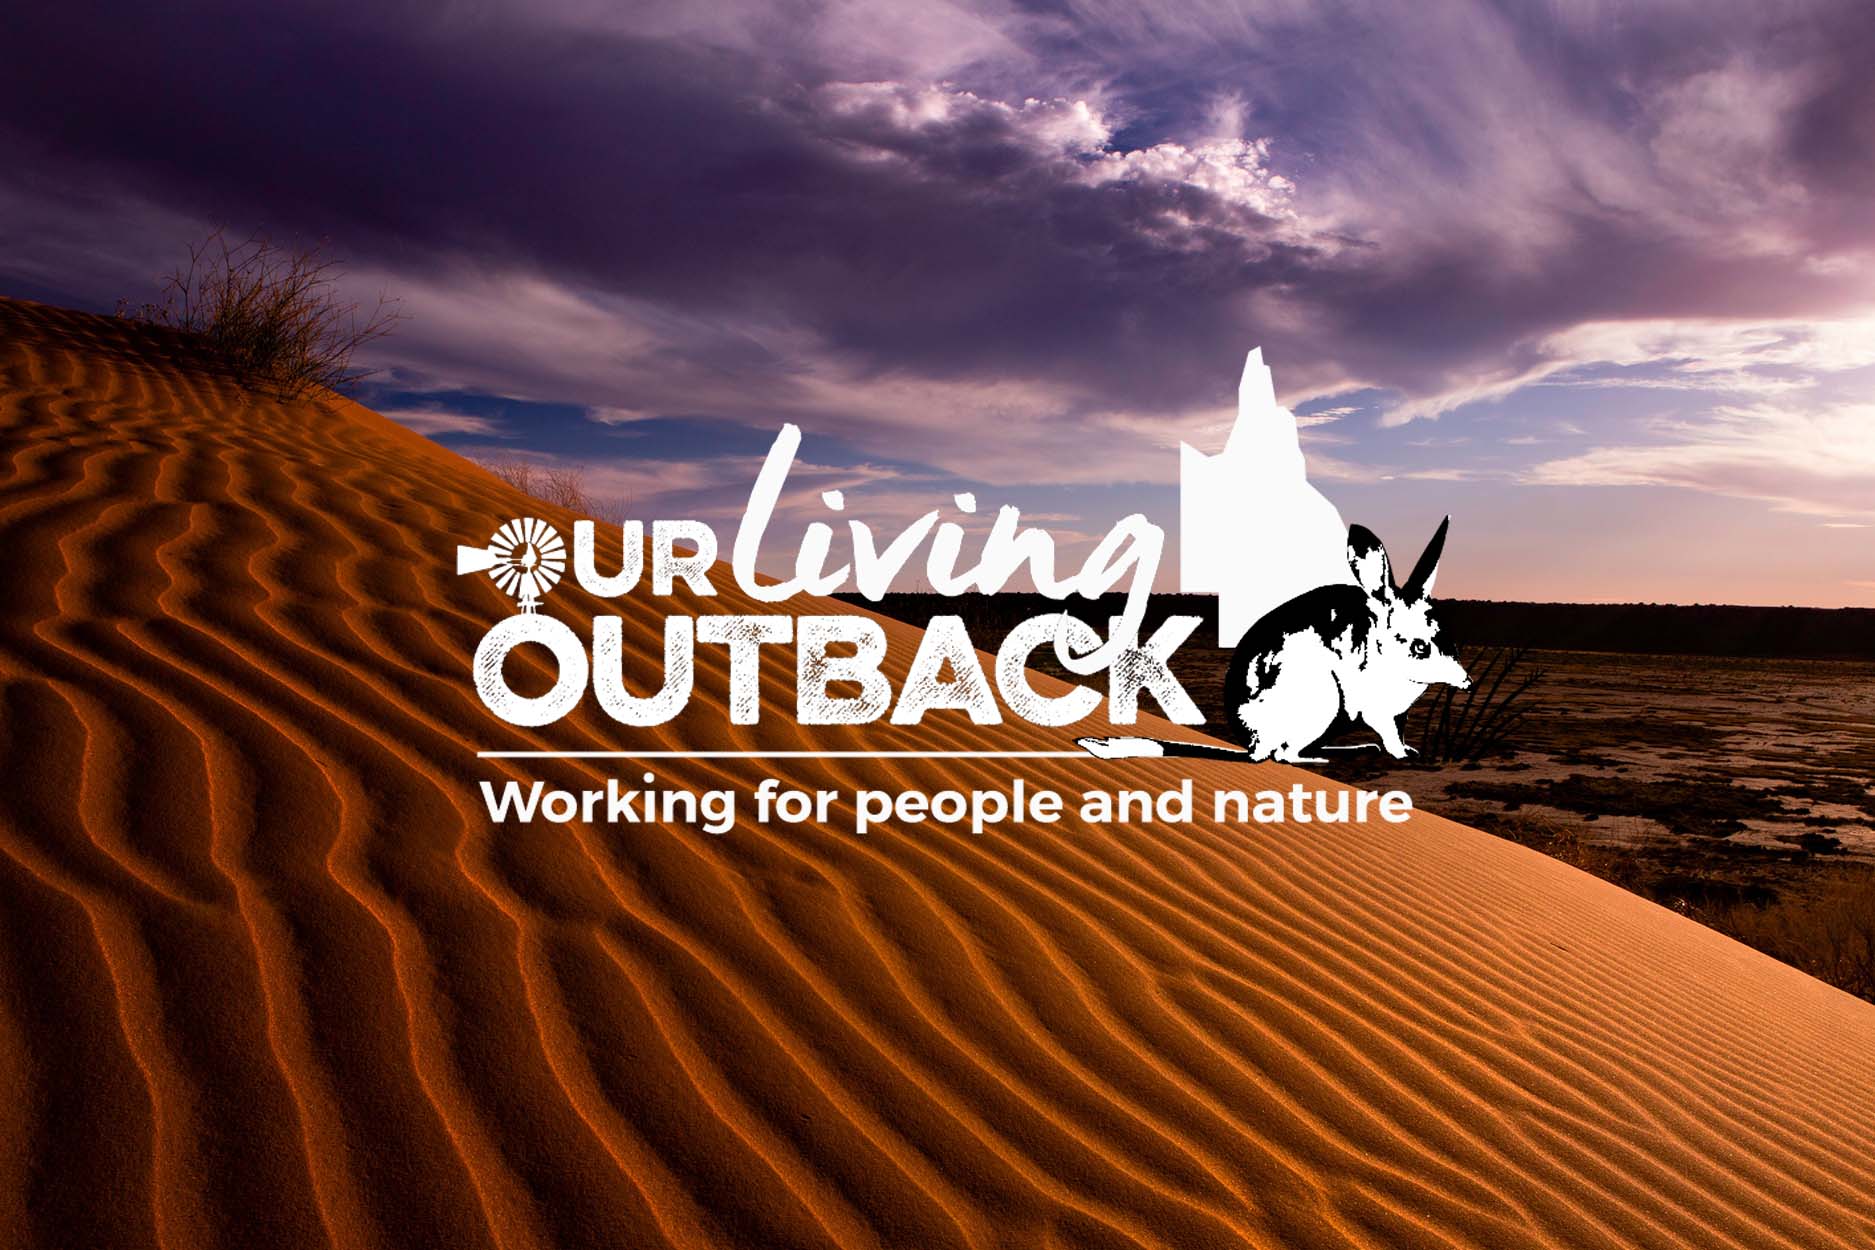 Our Living Outback CampaignNow Campaign